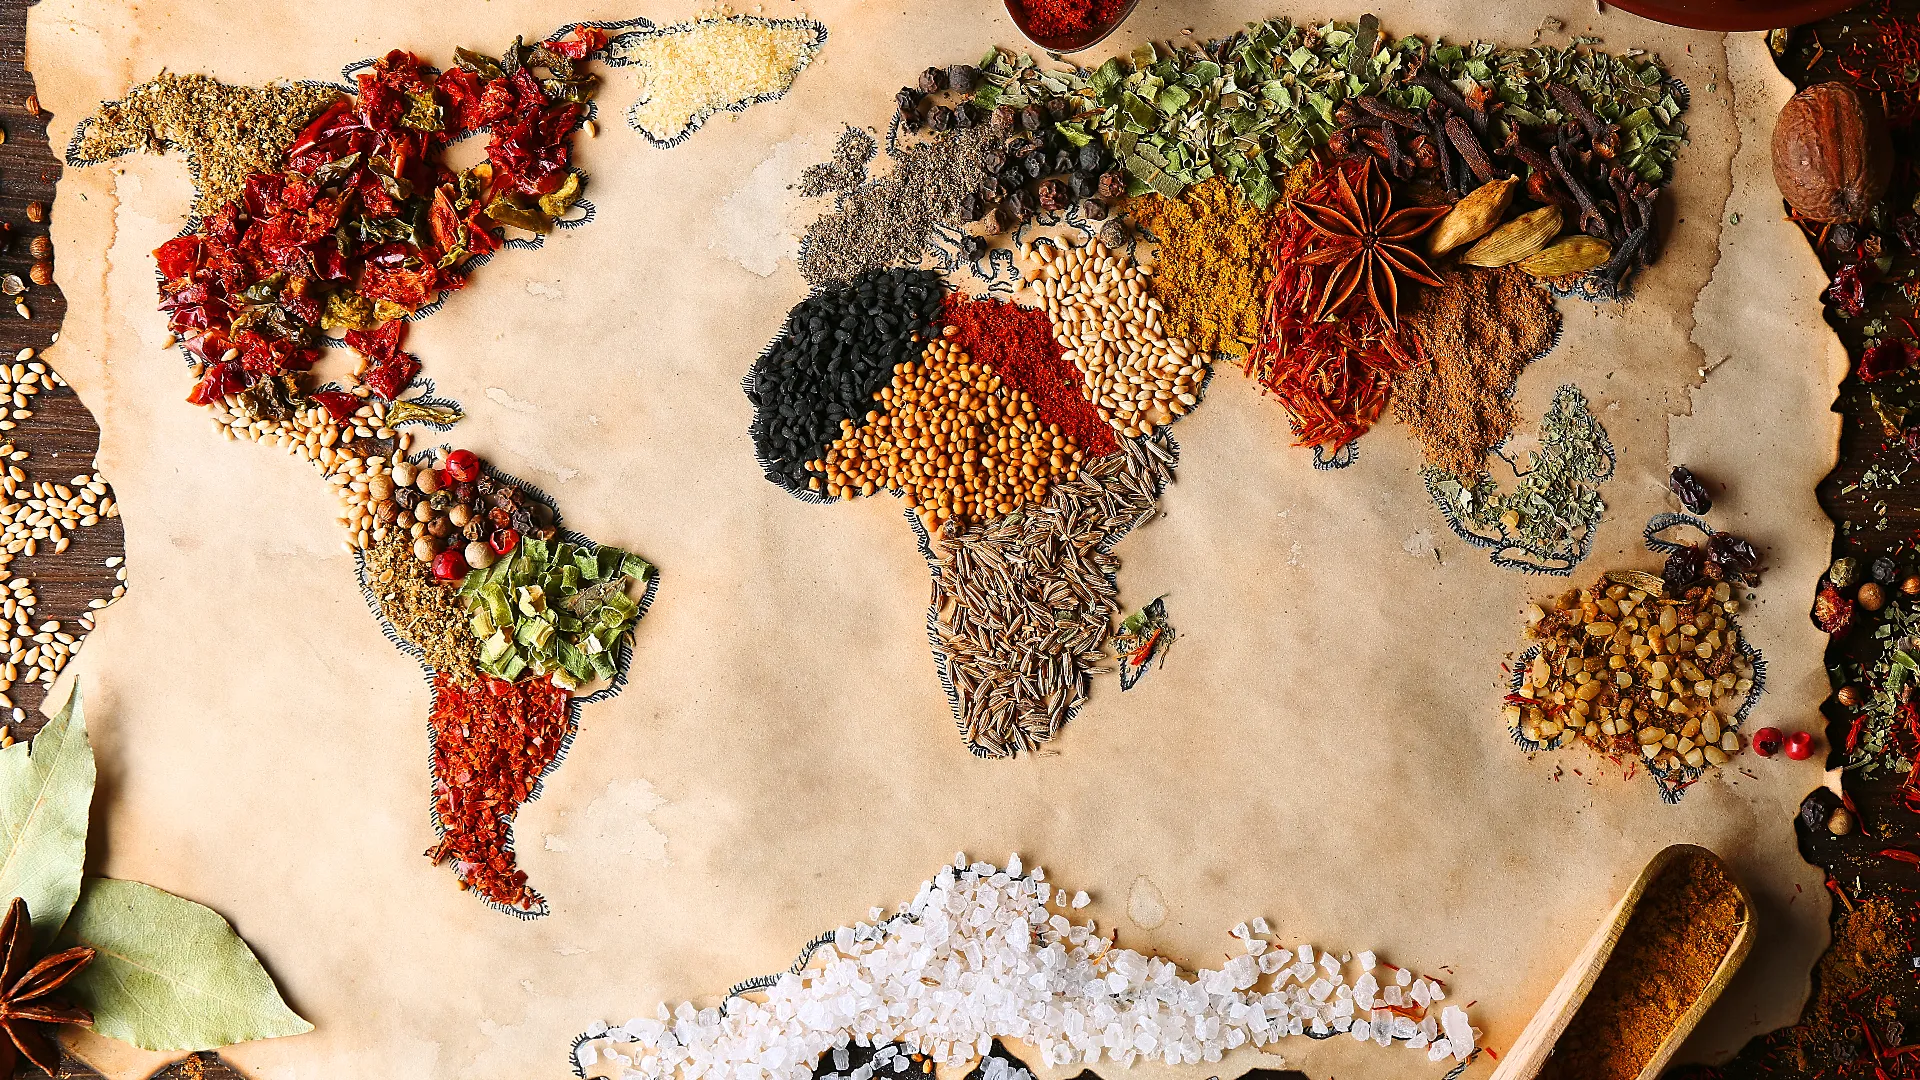 World Map made up of foods from the regions they belong to